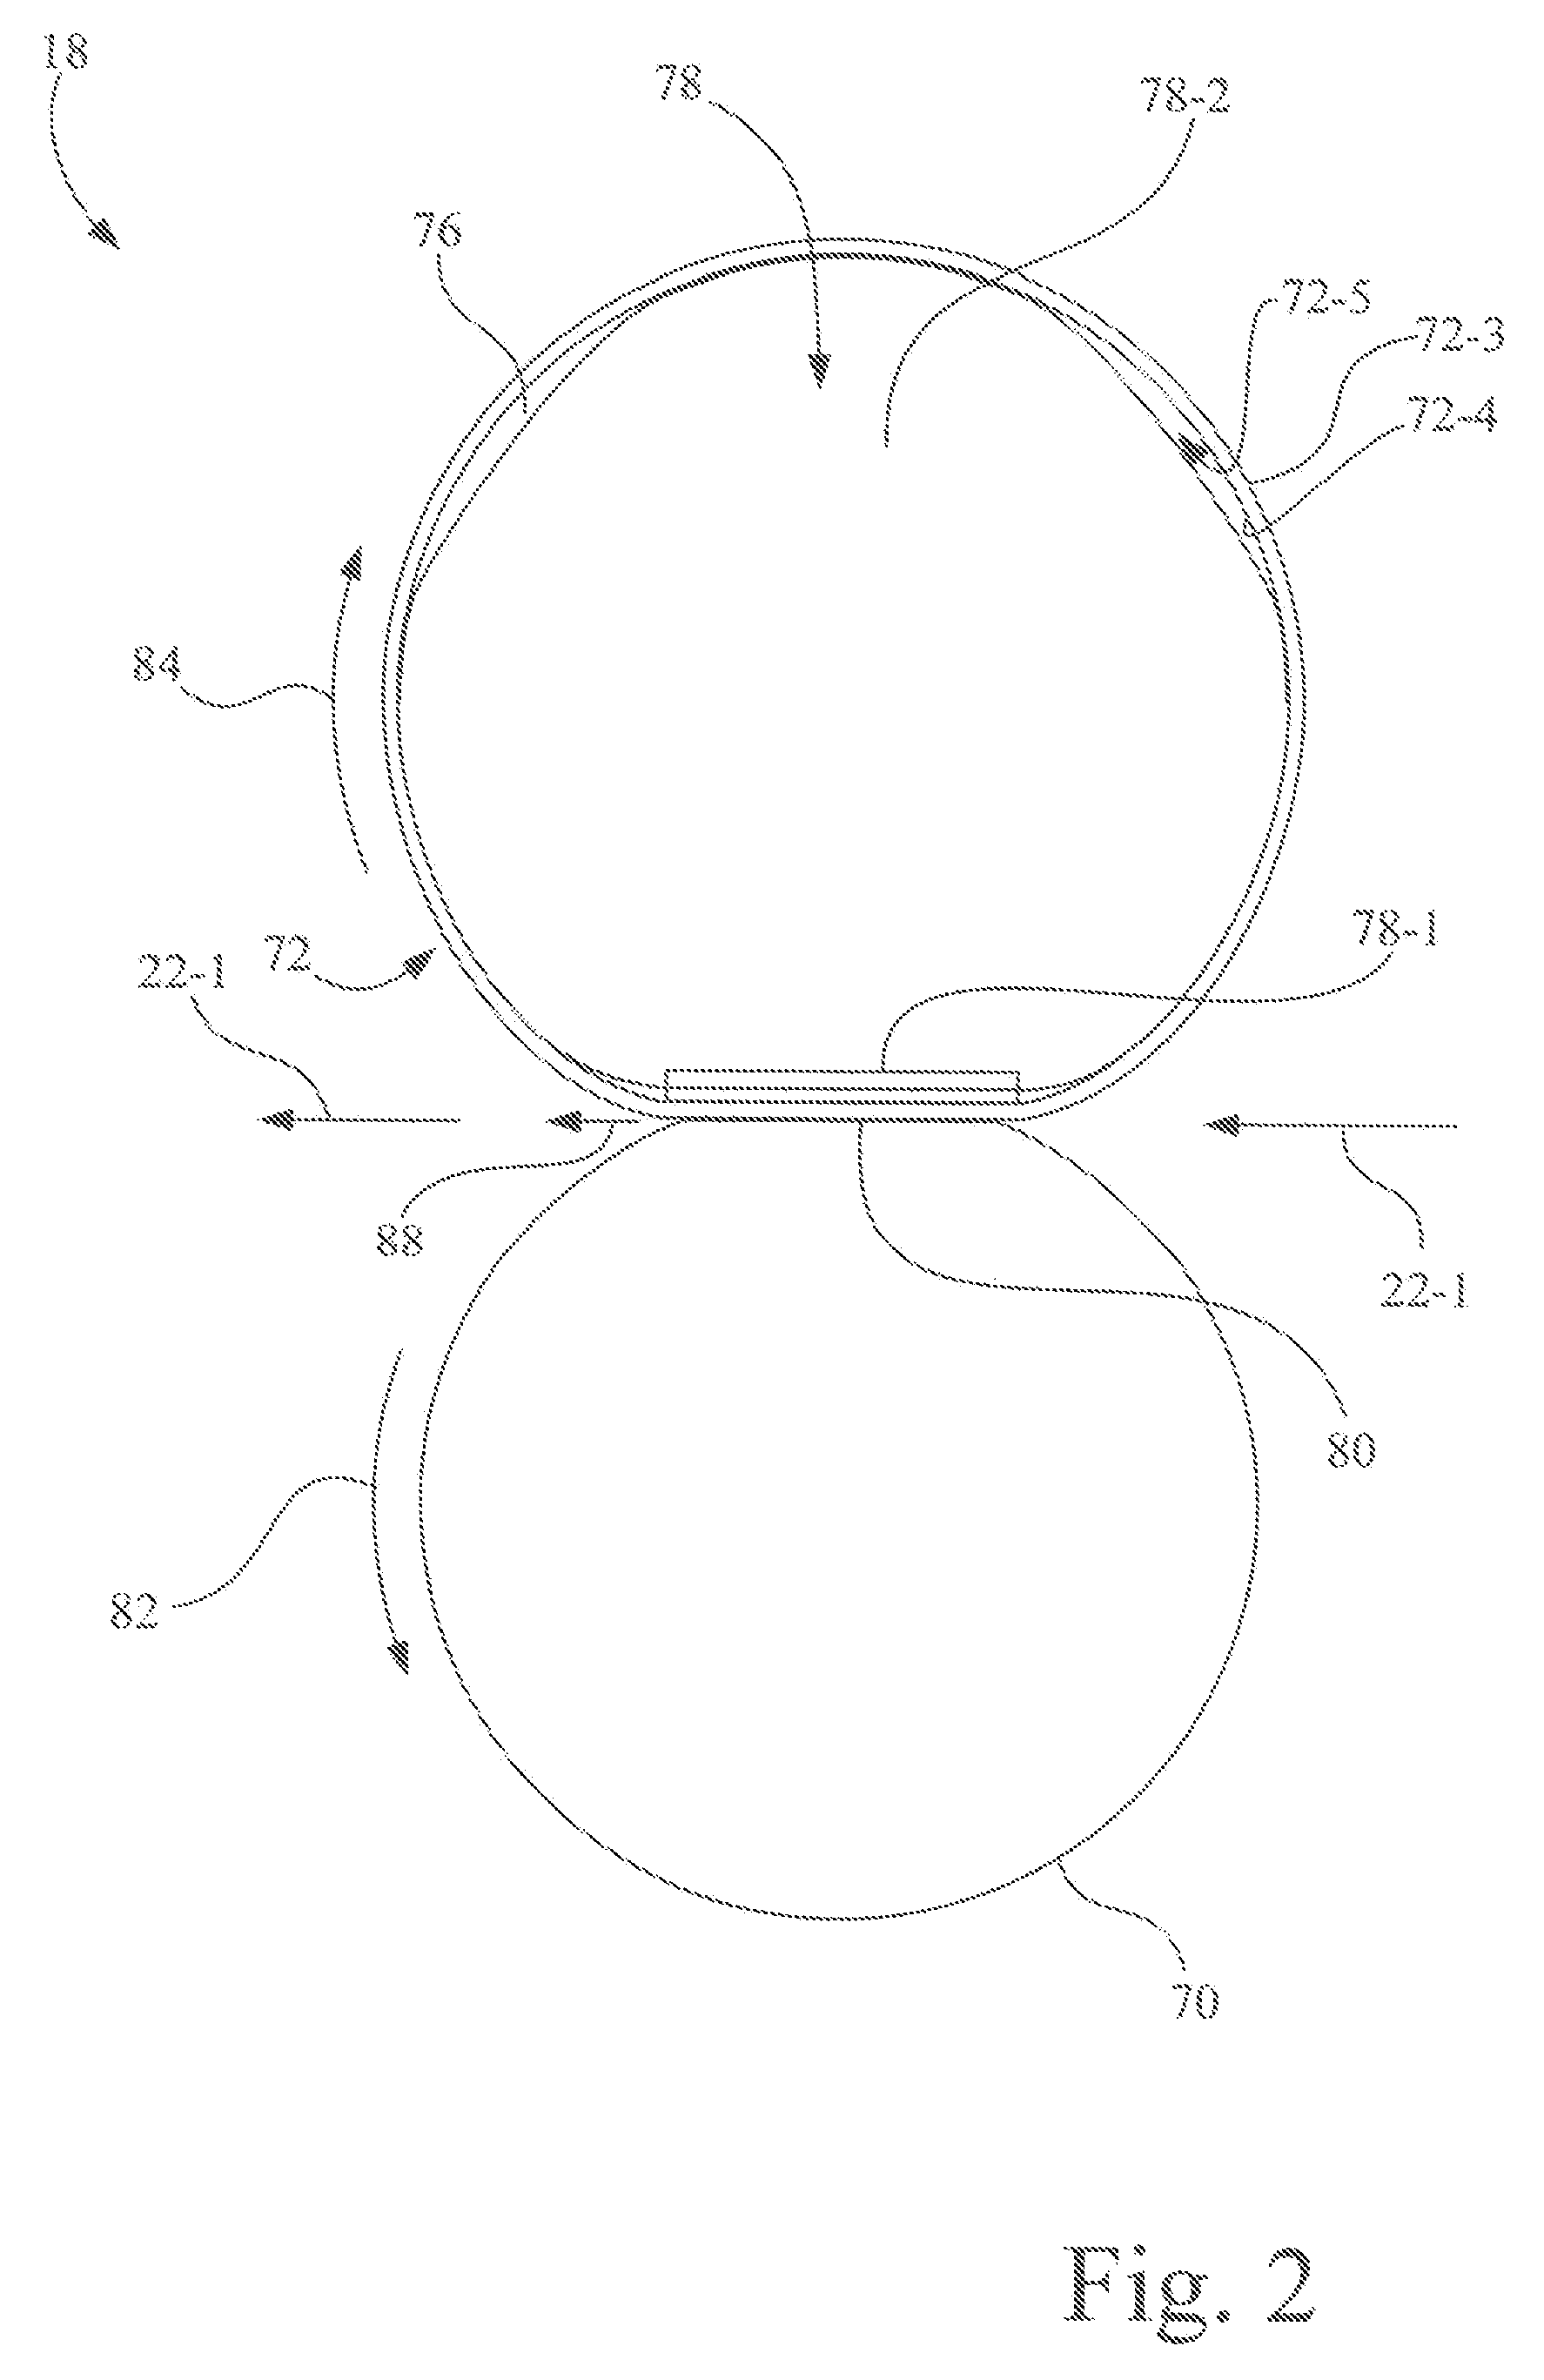 Fuser assembly having oil retention features